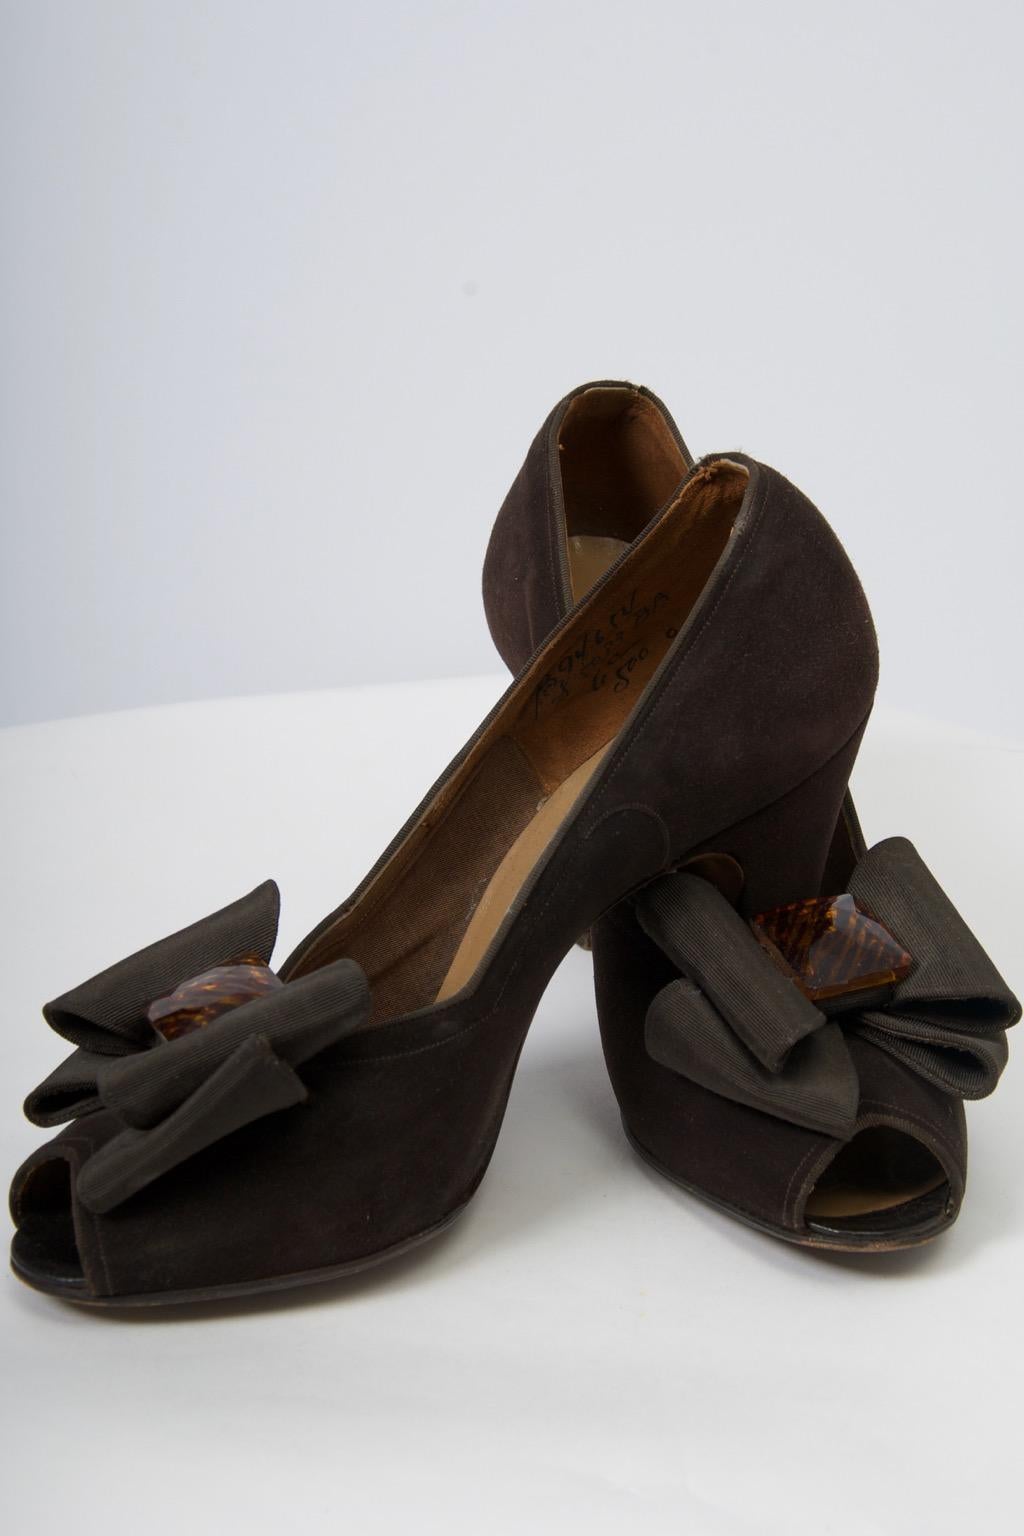 Sophisticated and elegant late 1940s-early 1950s brown suede pumps featuring an open toe, chunky heel, and large grosgrain bow centering a tortoise ornament. Made by Delman for Bergdorf Goodman. From an estate of European royalty. Marked size 6C,